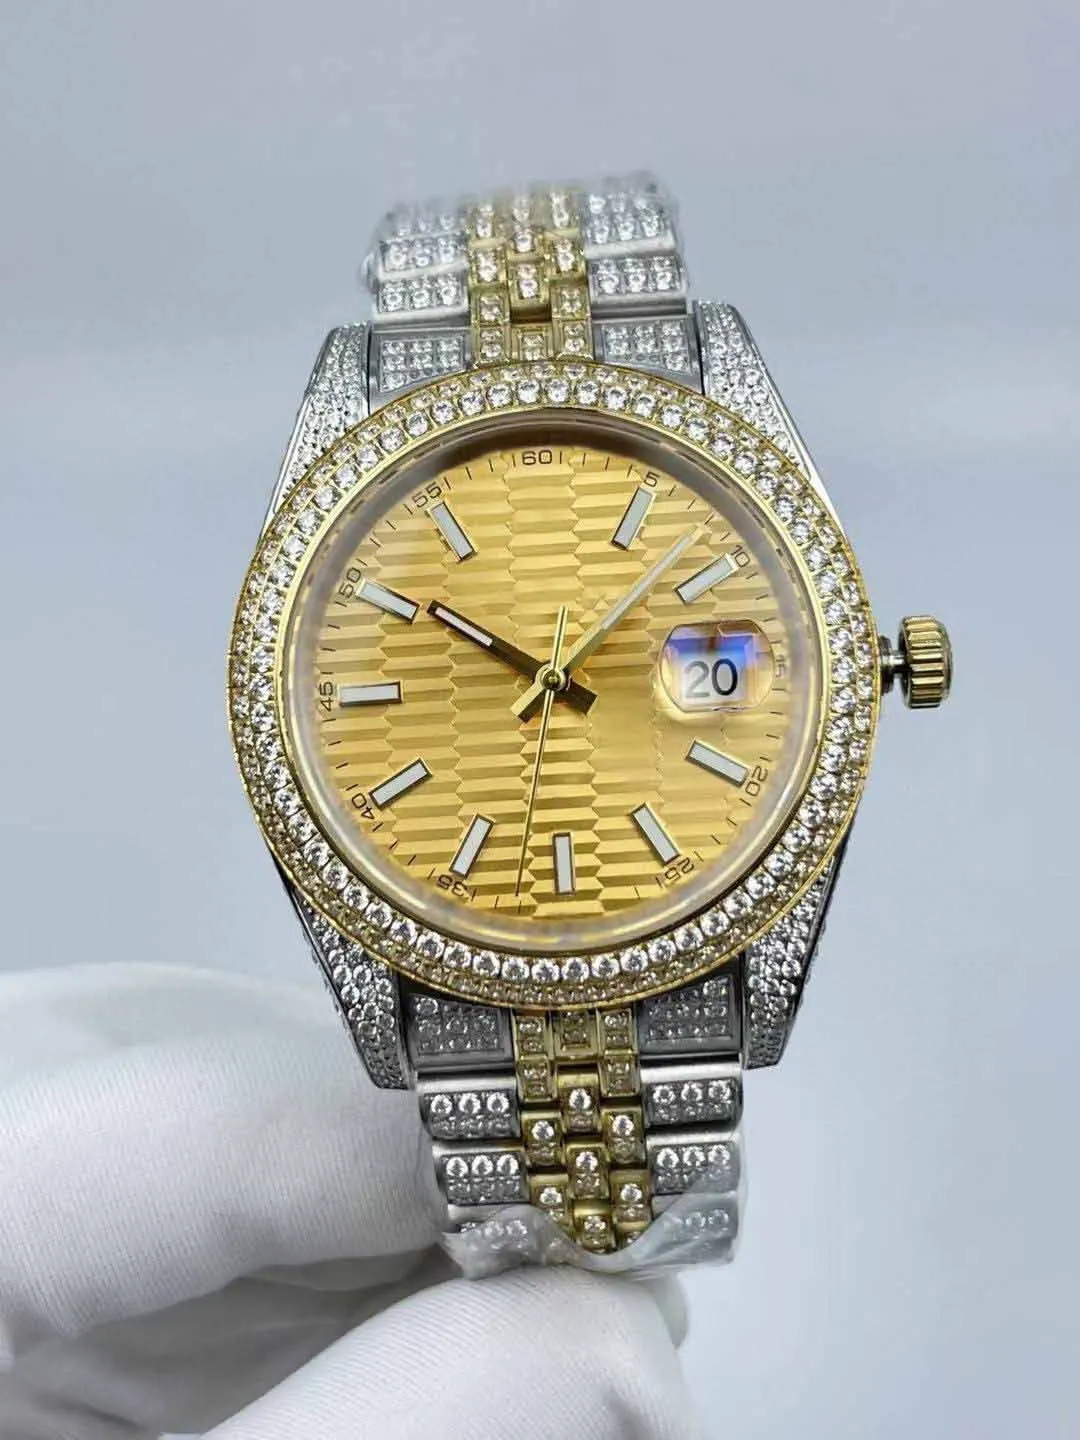 

"Golden Elegance - Full Diamond Case with Pitted Surface, Long Nail Scale, 41mm Size, Mechanical Movement, Waterproof, Folding